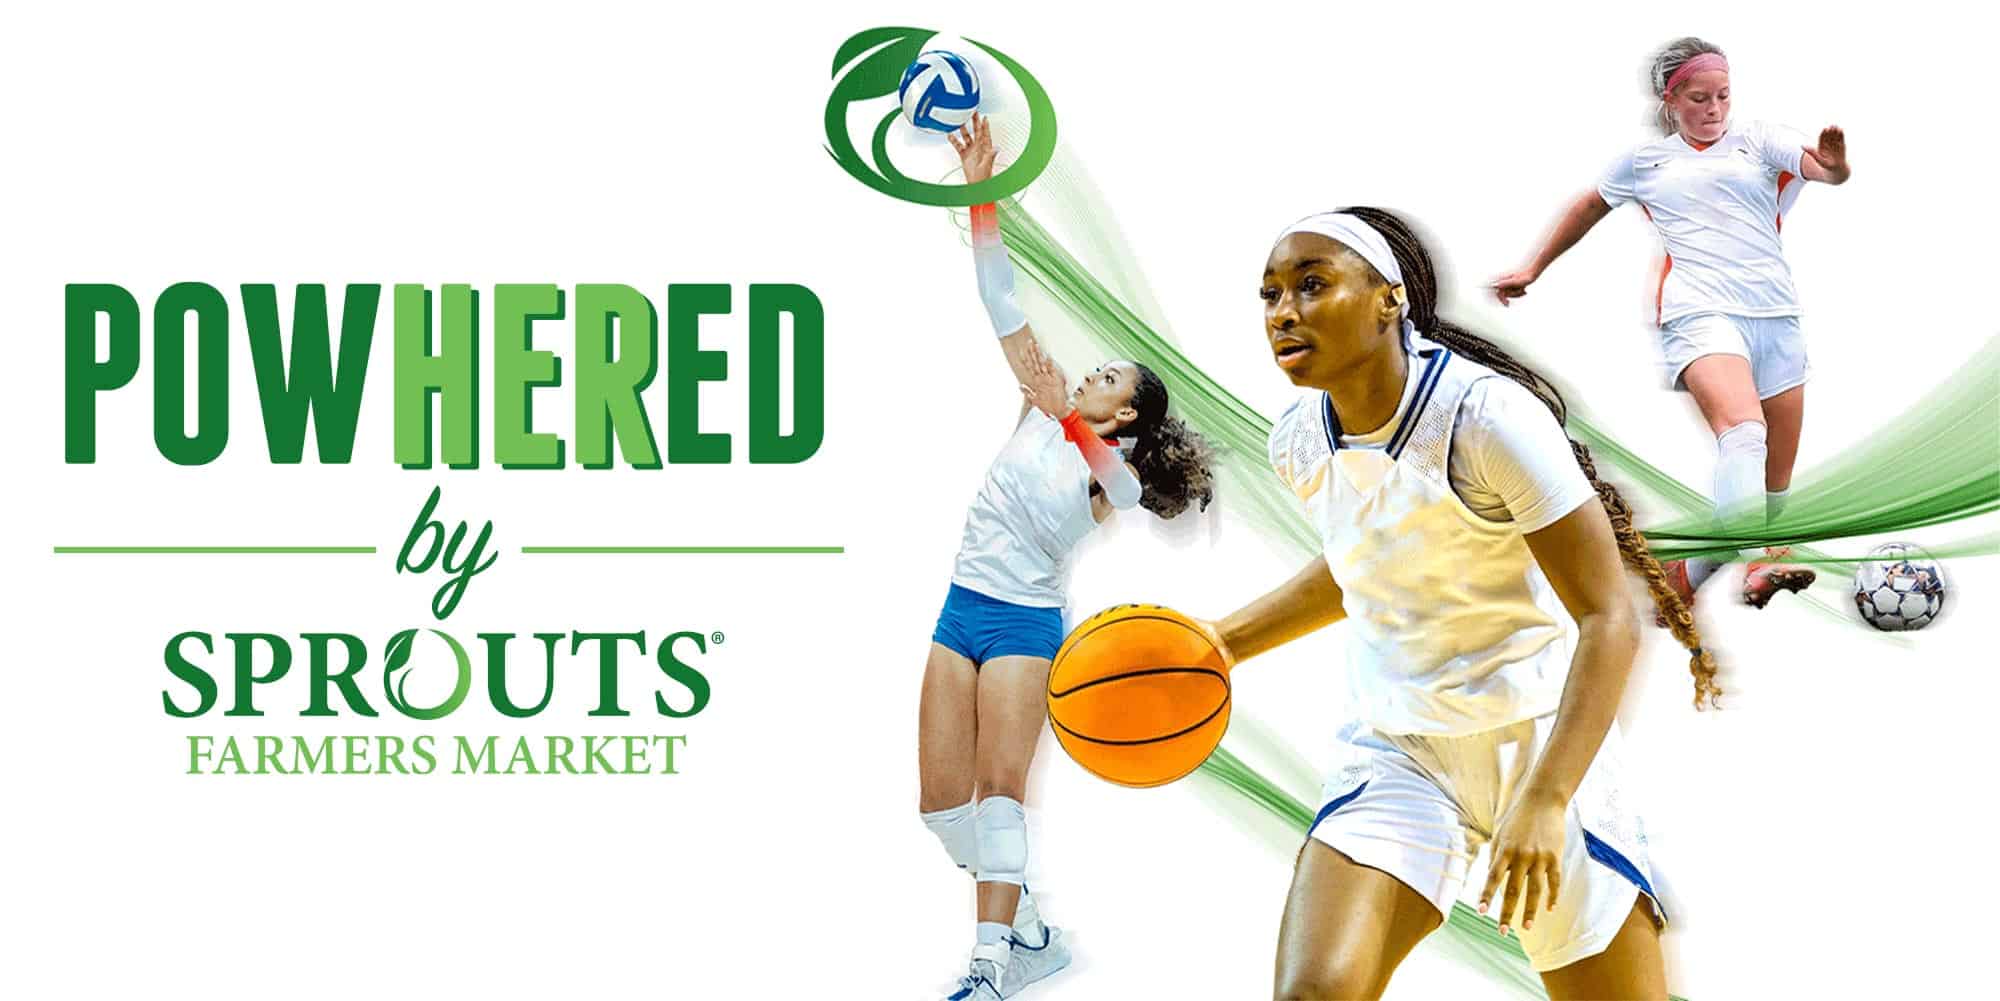 PowHERed by Sprouts logo next to female athletes